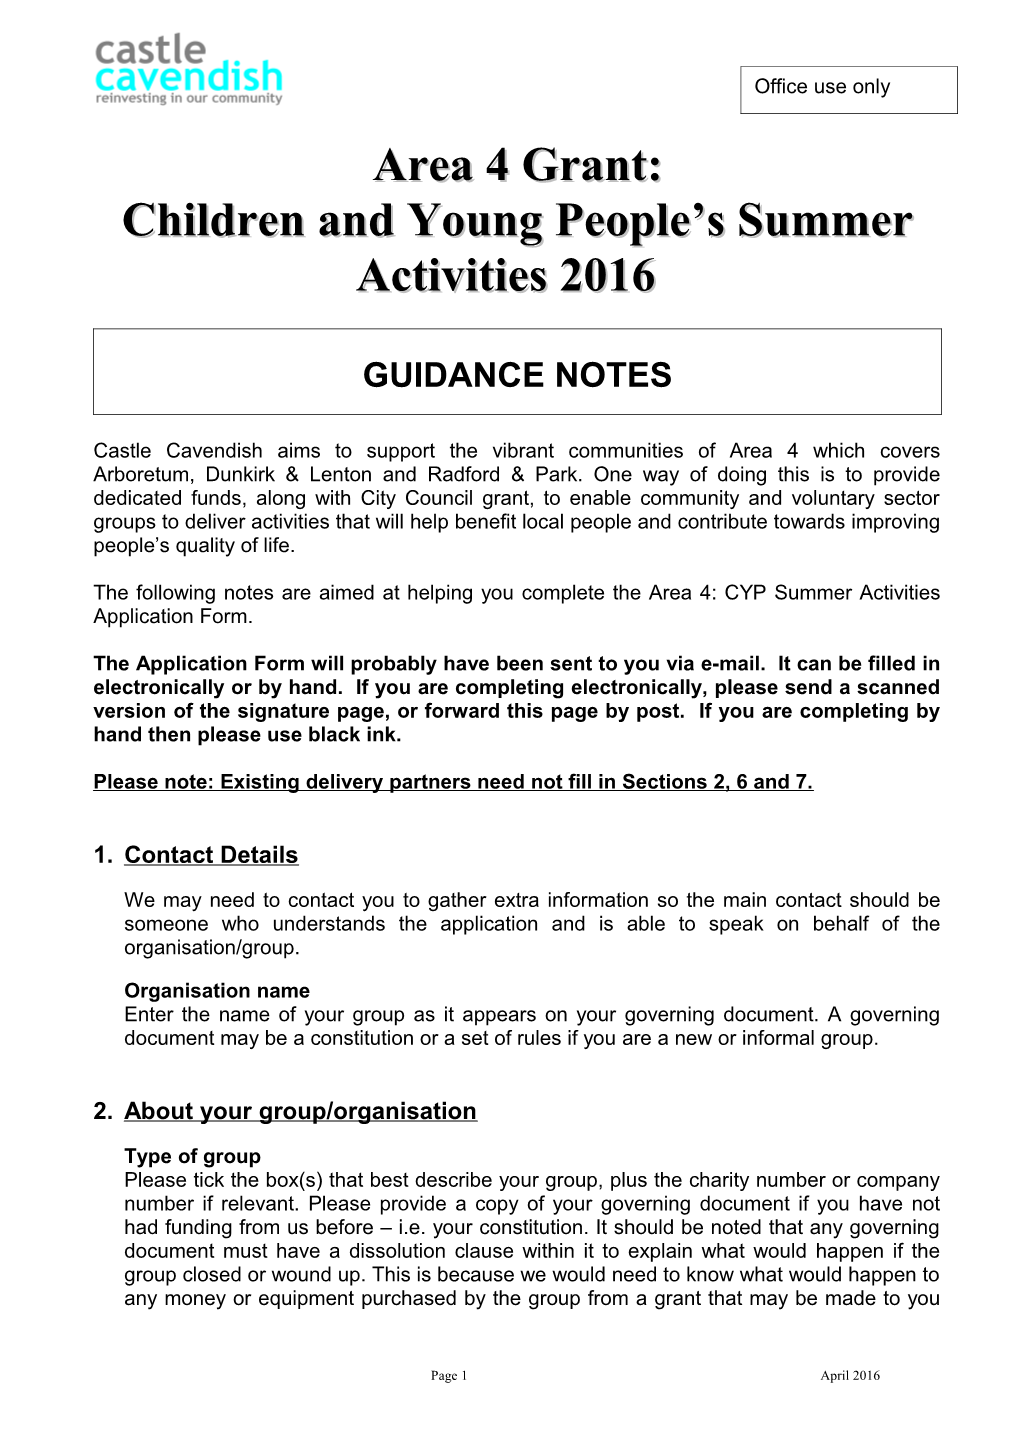 Children and Young People S Summer Activities 2016